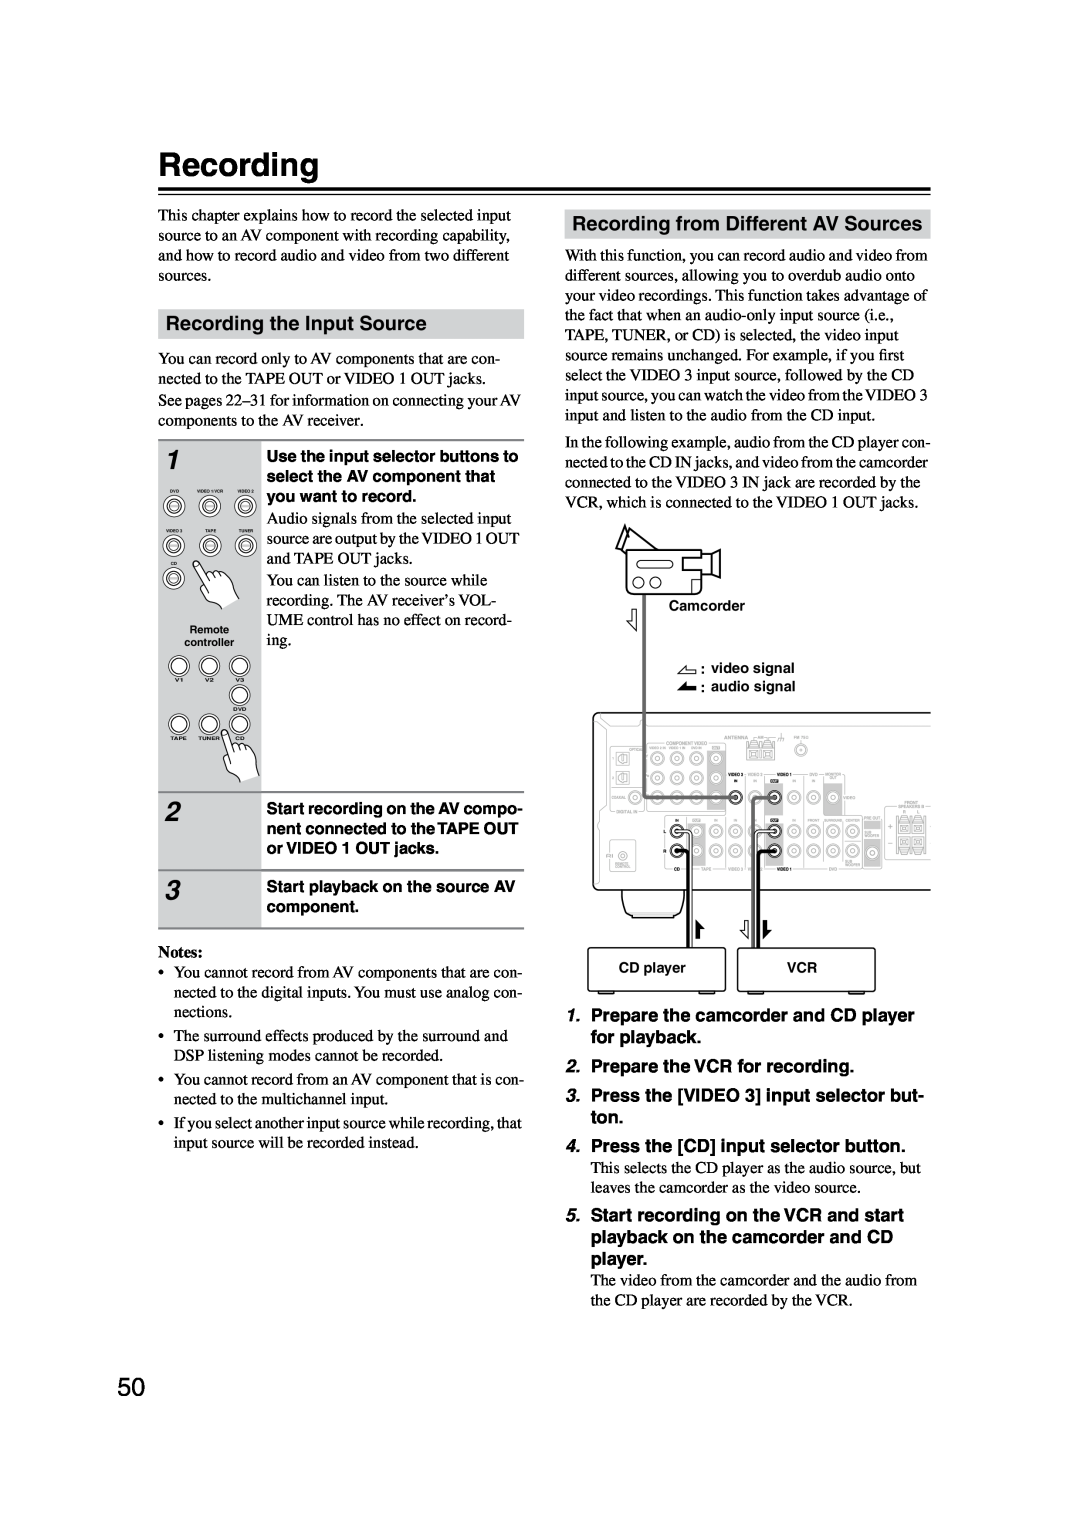 Onkyo TX-SR304 instruction manual Recording the Input Source, Recording from Different AV Sources 